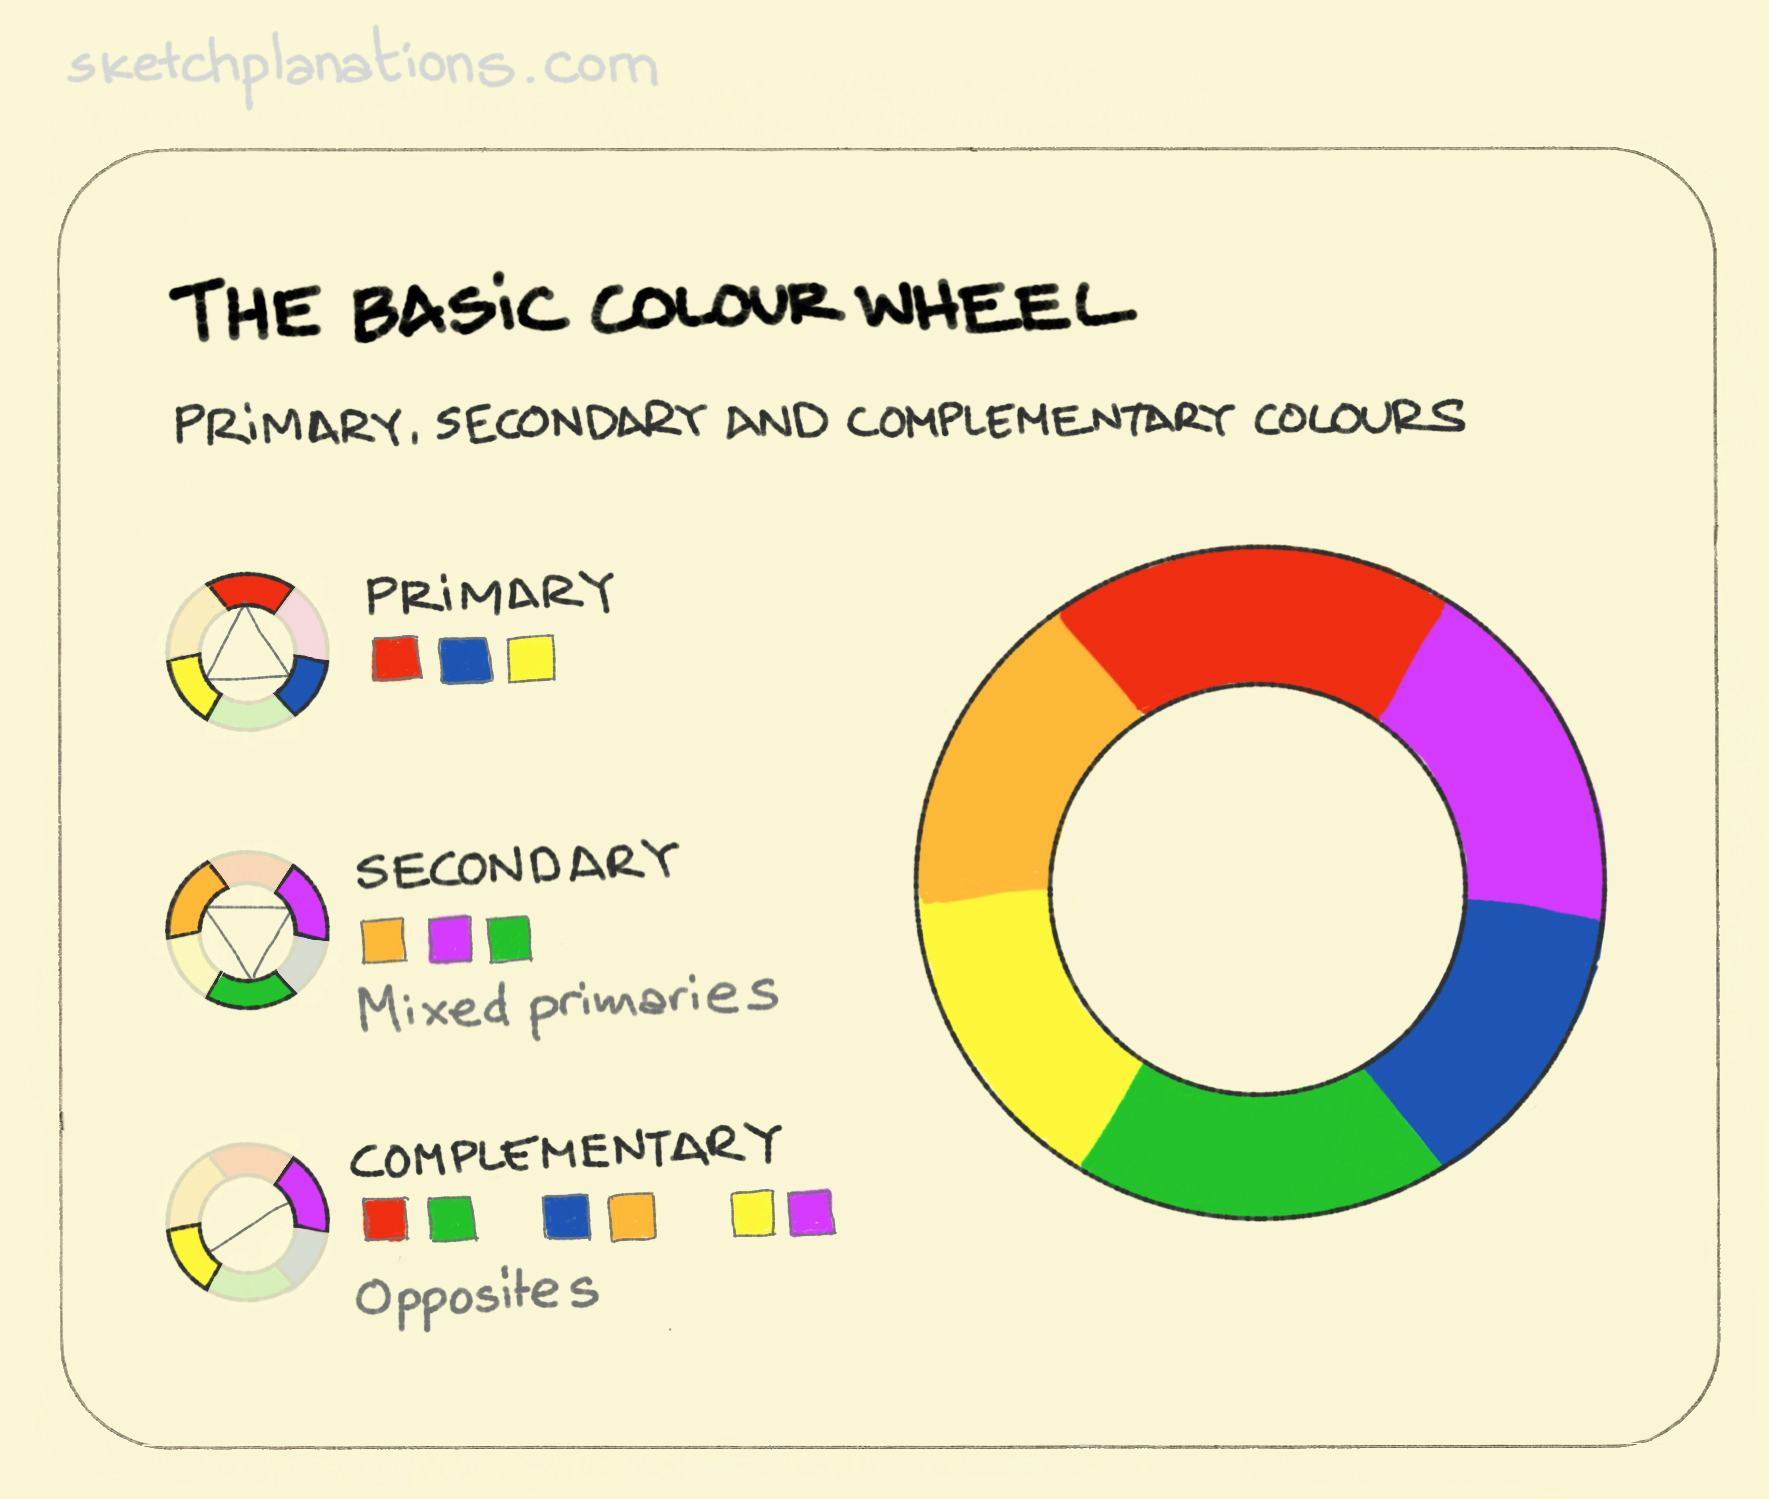 The basic colour wheel - Sketchplanations